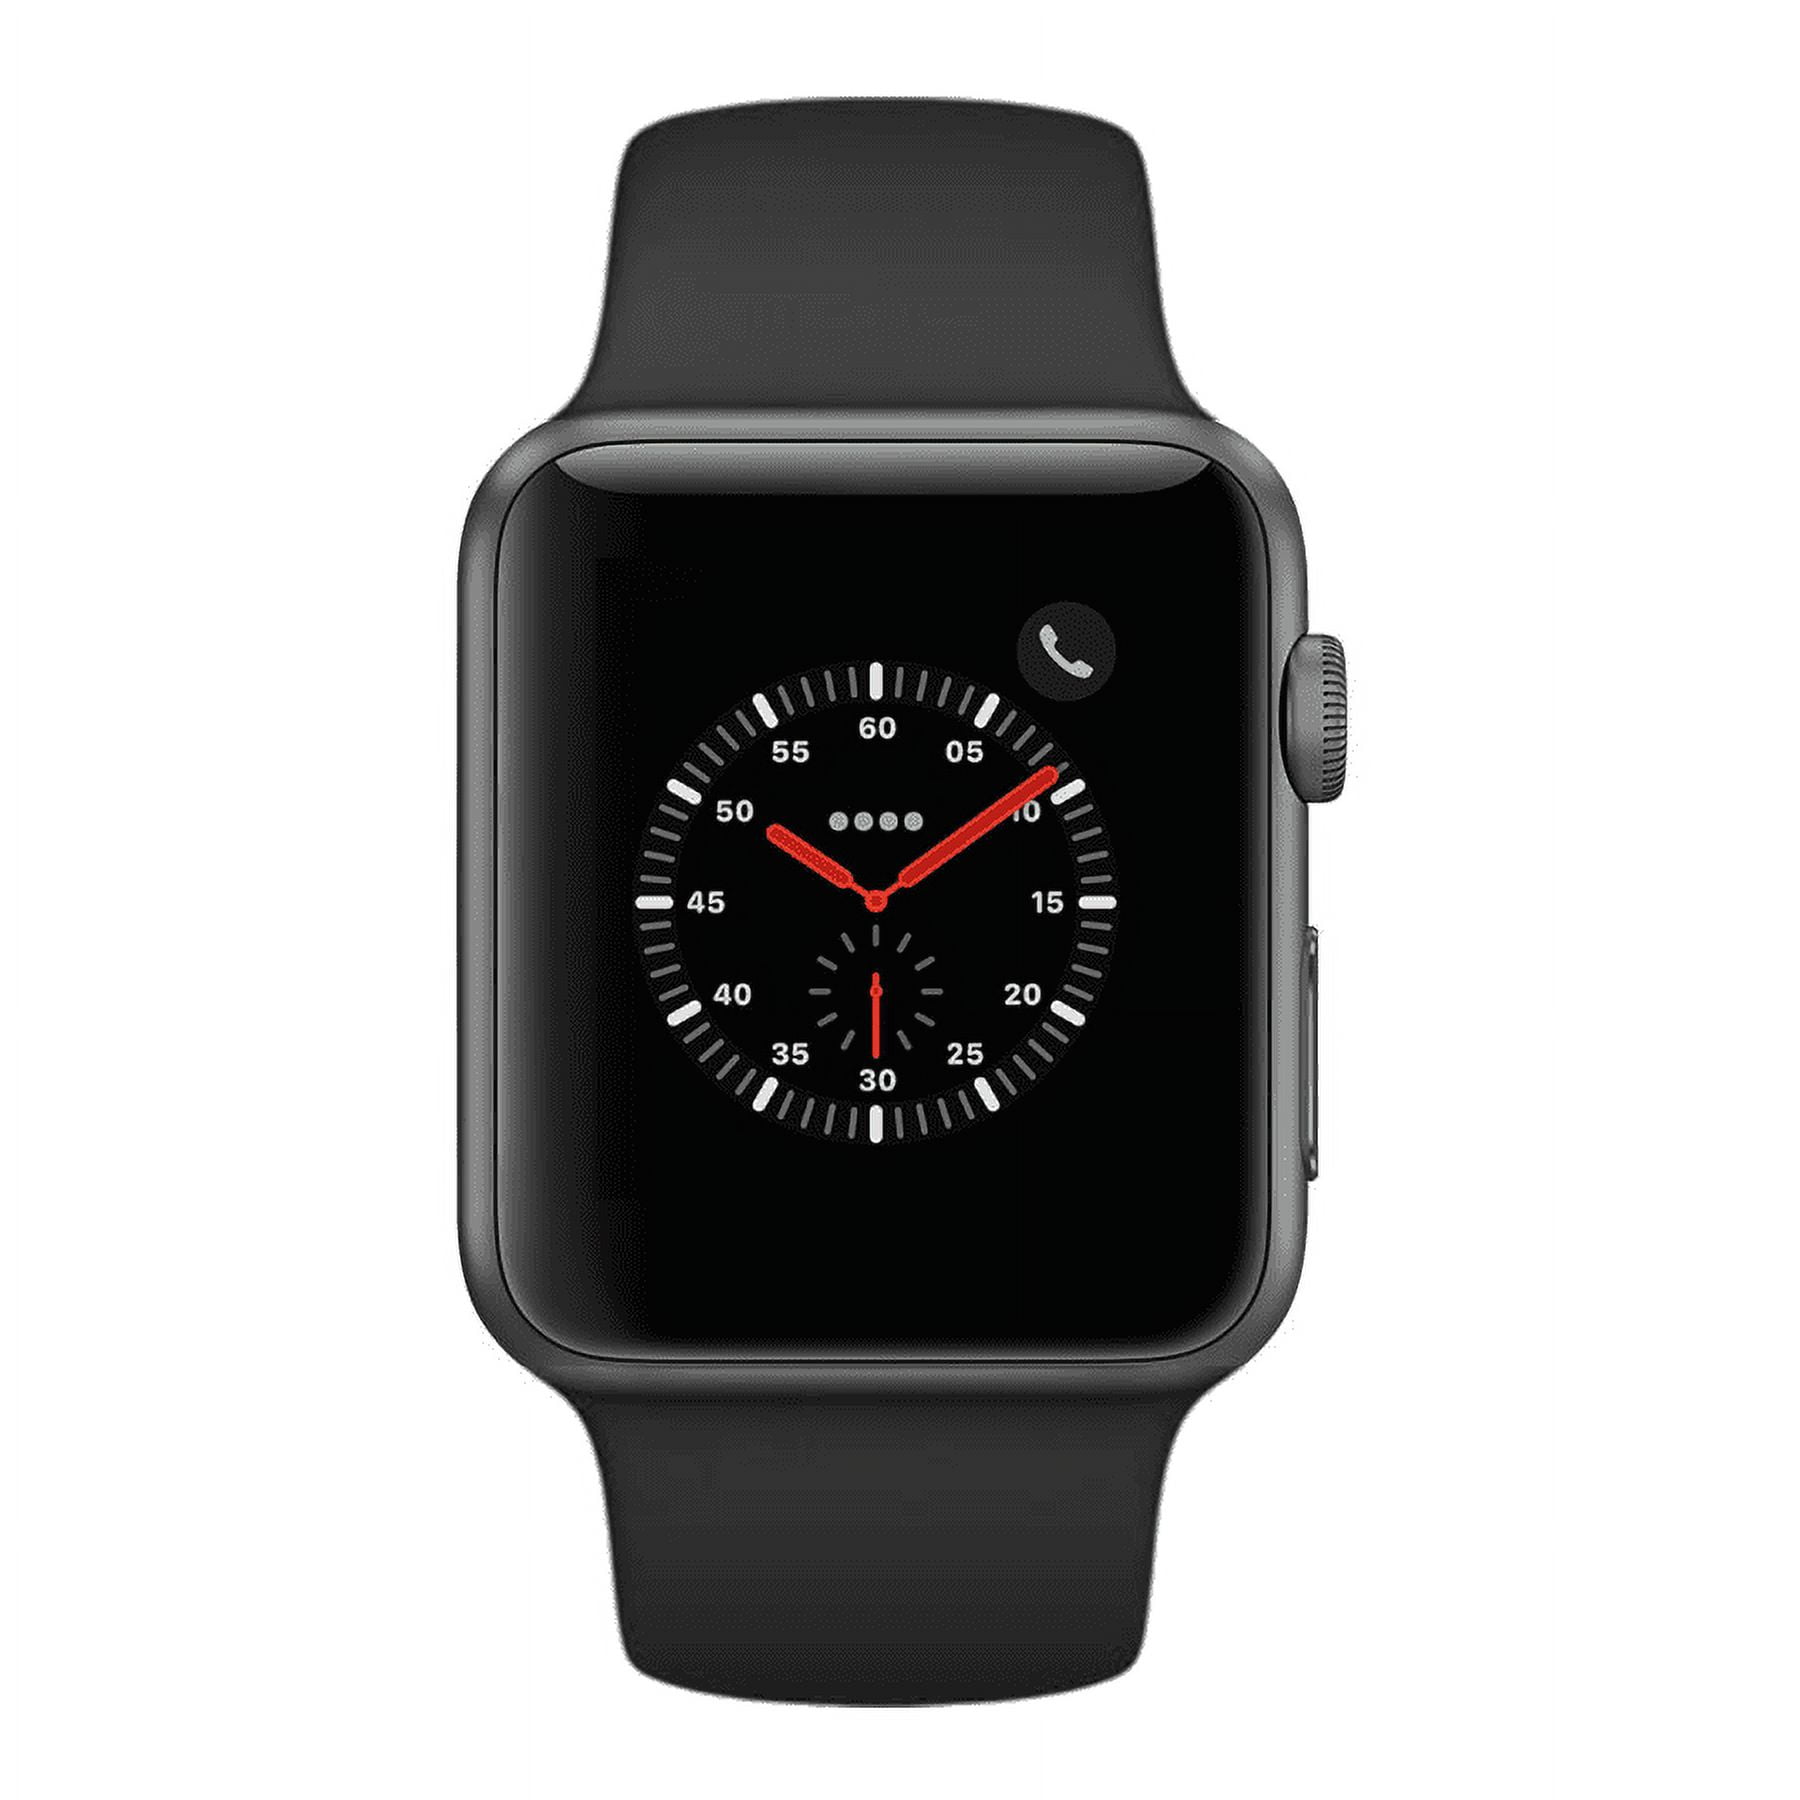 Apple Watch Series 3, 38MM, GPS + Cellular, Space Gray Aluminum